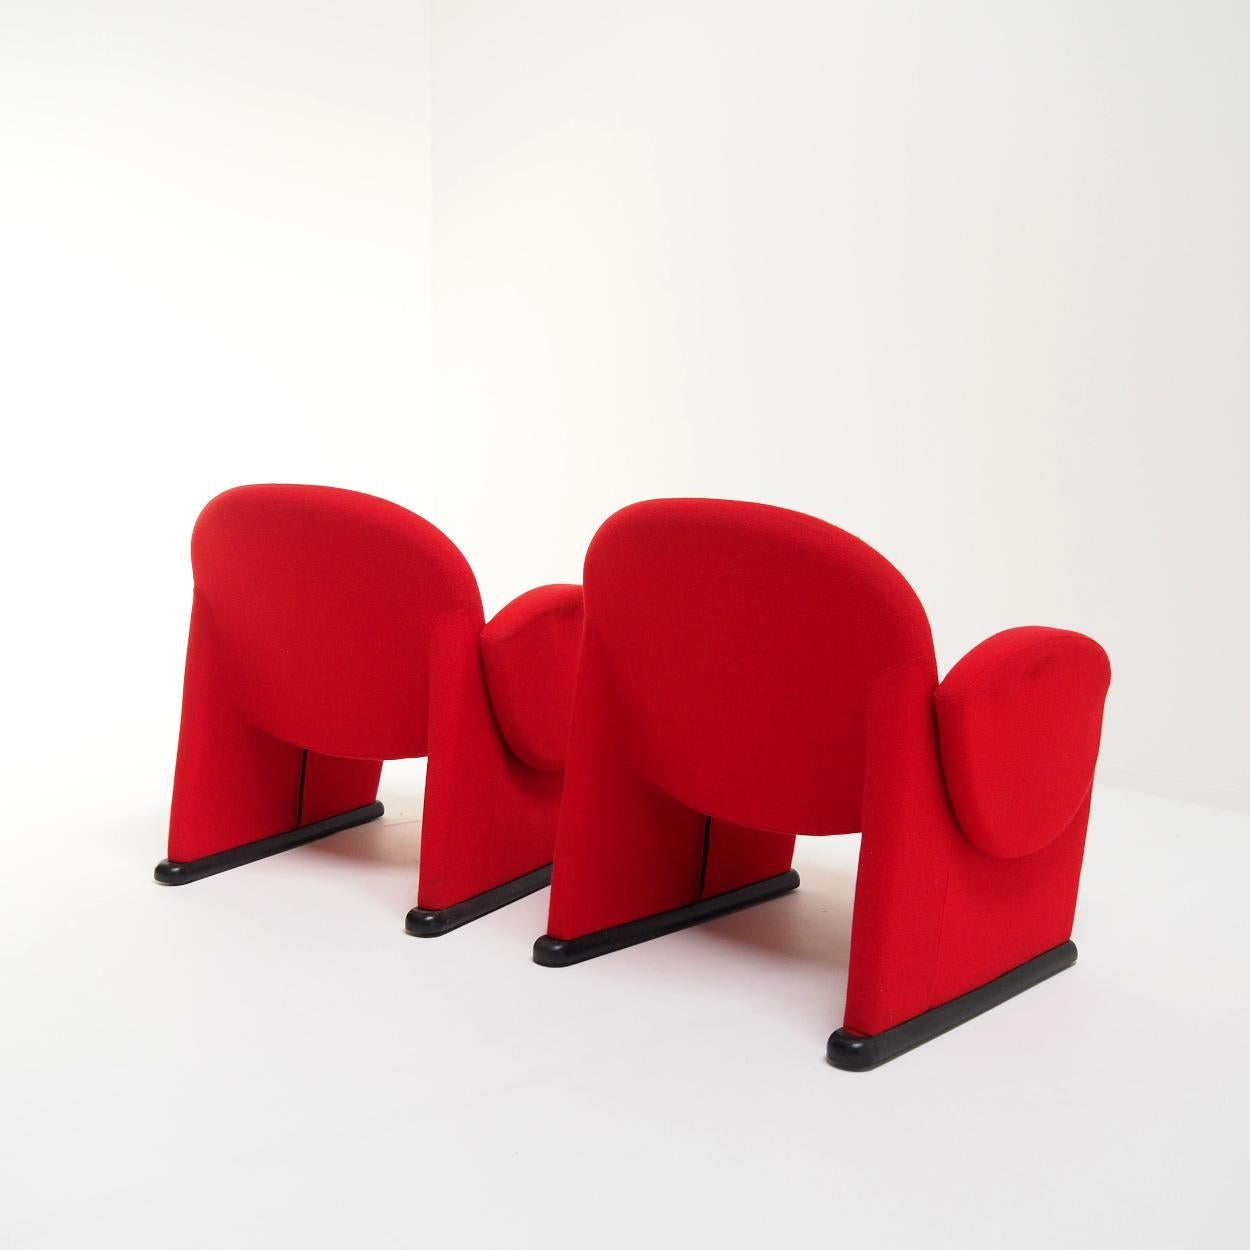 Dutch Funky Red Chairs from the 70s, Pierre Paulin Style For Sale